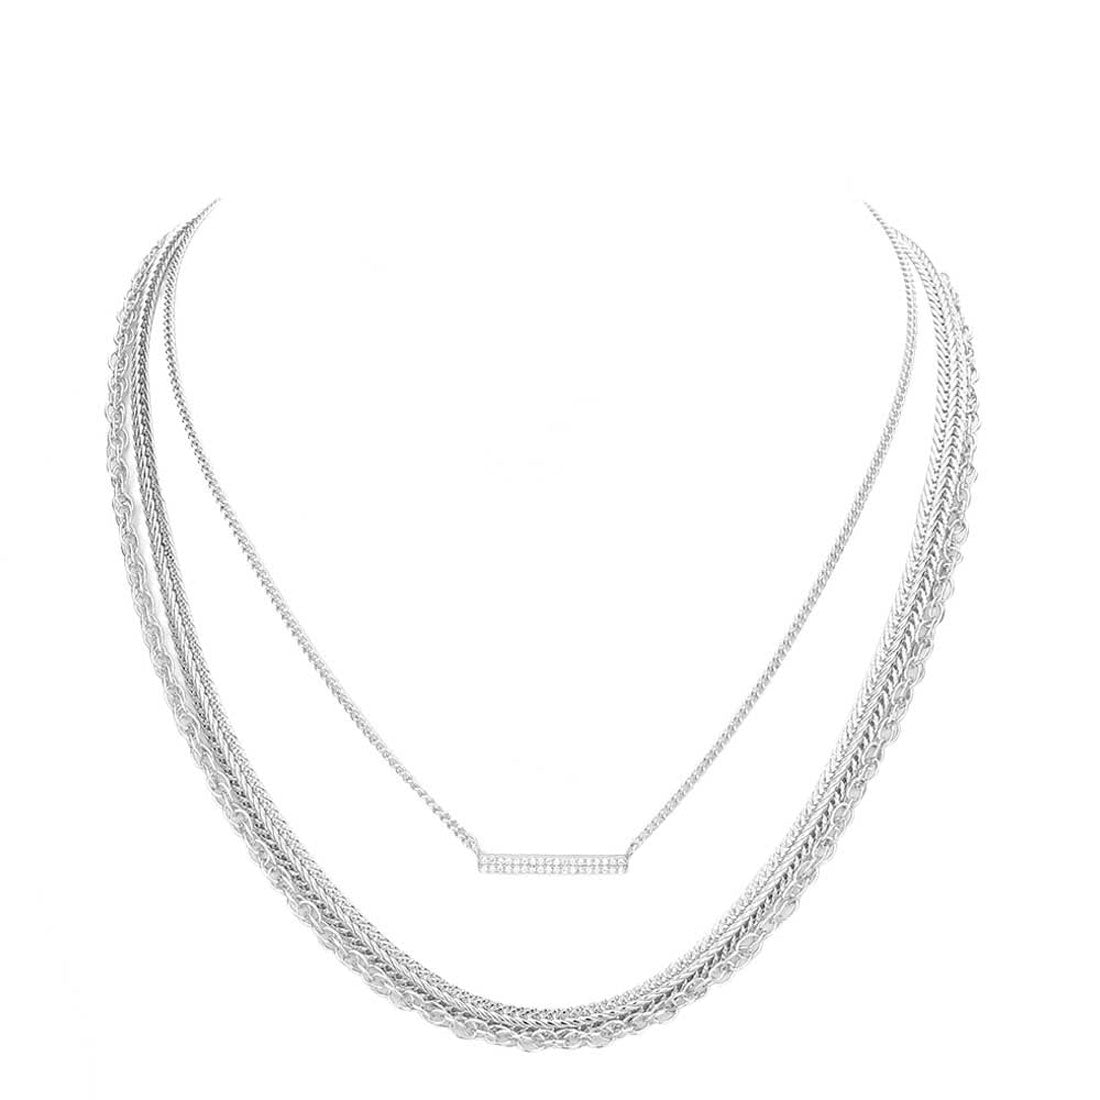 Rhodium Multi Layered CZ Pendant Necklace. Get ready with these Necklace, put on a pop of color to complete your ensemble. Perfect for adding just the right amount of shimmer & shine and a touch of class to special events. Perfect Birthday Gift, Anniversary Gift, Mother's Day Gift, Valentine's Day Gift.